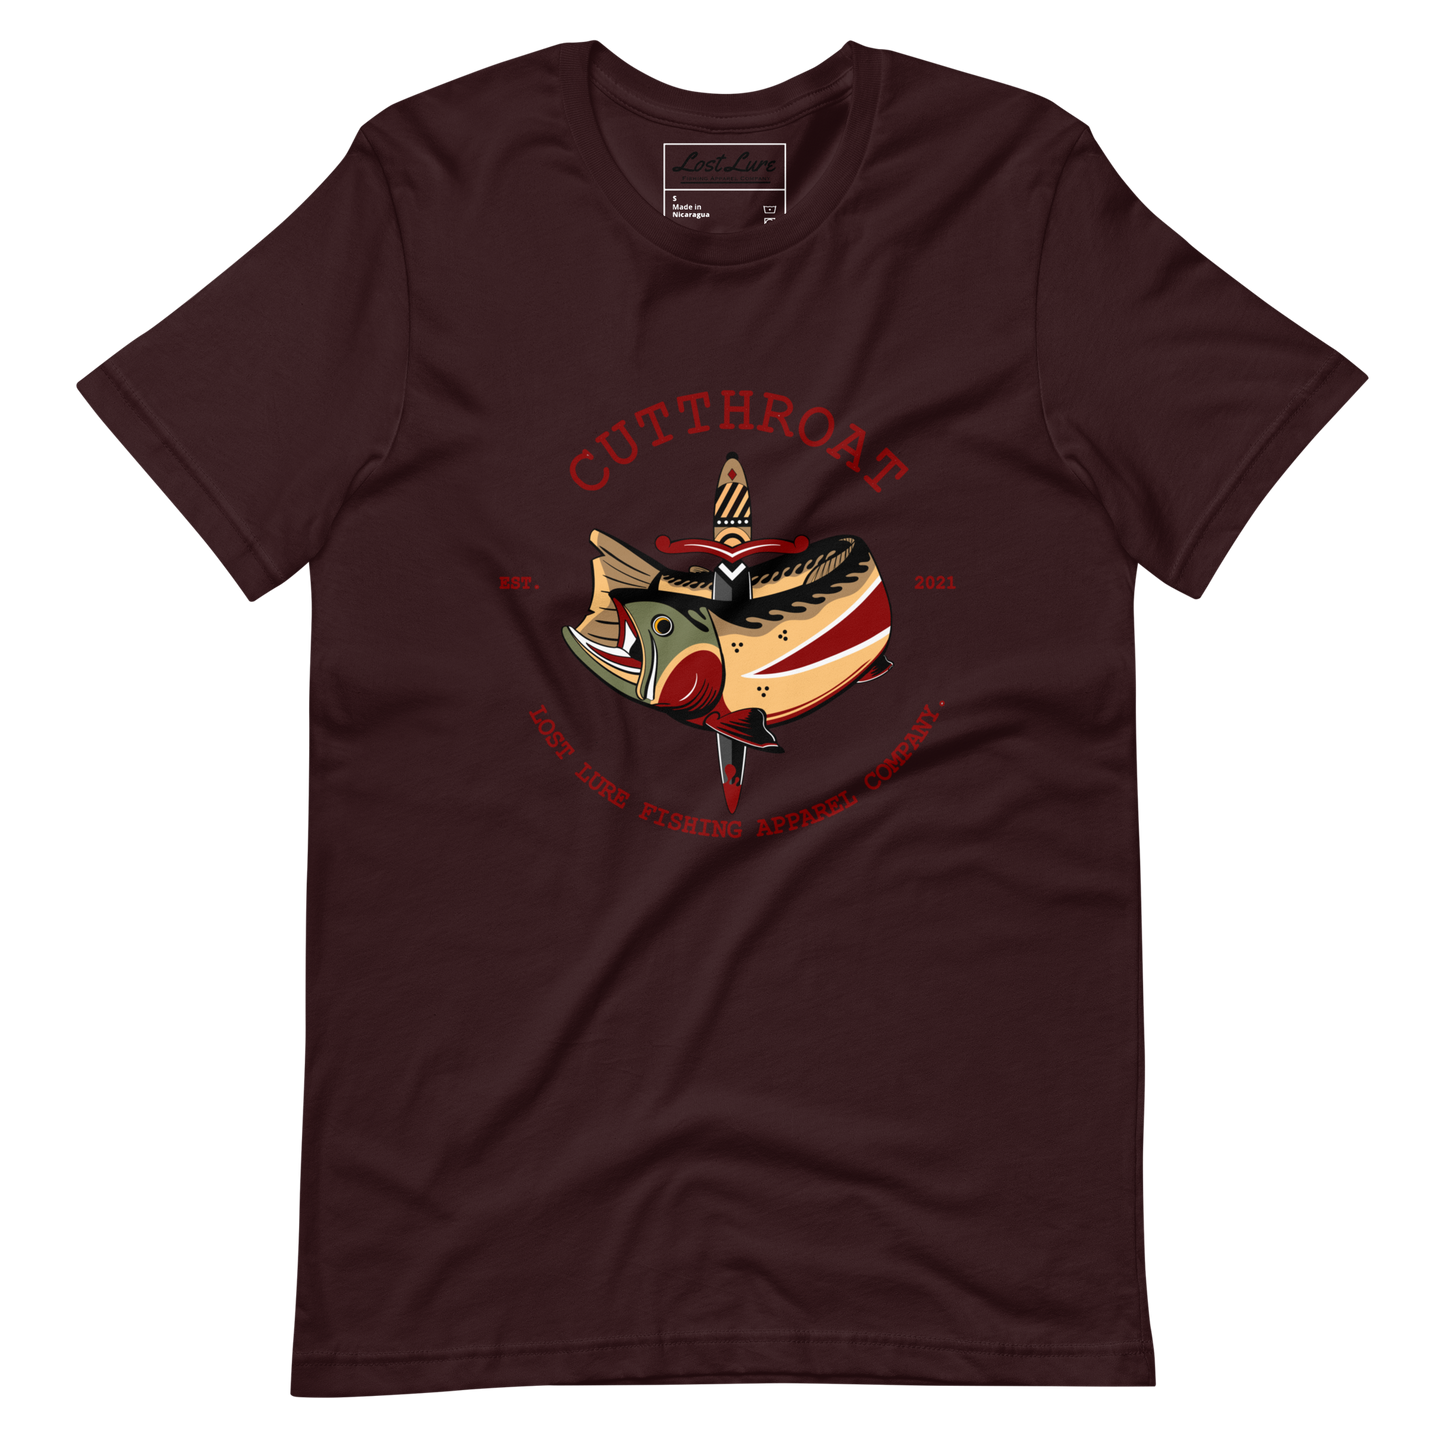 Cutthroat Trout fishing shirt. It’s an American traditional style design with a cutthroat trout and a dagger. The shirt reads Cutthroat trout, est. 2021, lost lure fishing apparel company. The fishing design is on the front of the shirt. Dark maroon fishing shirt, front side